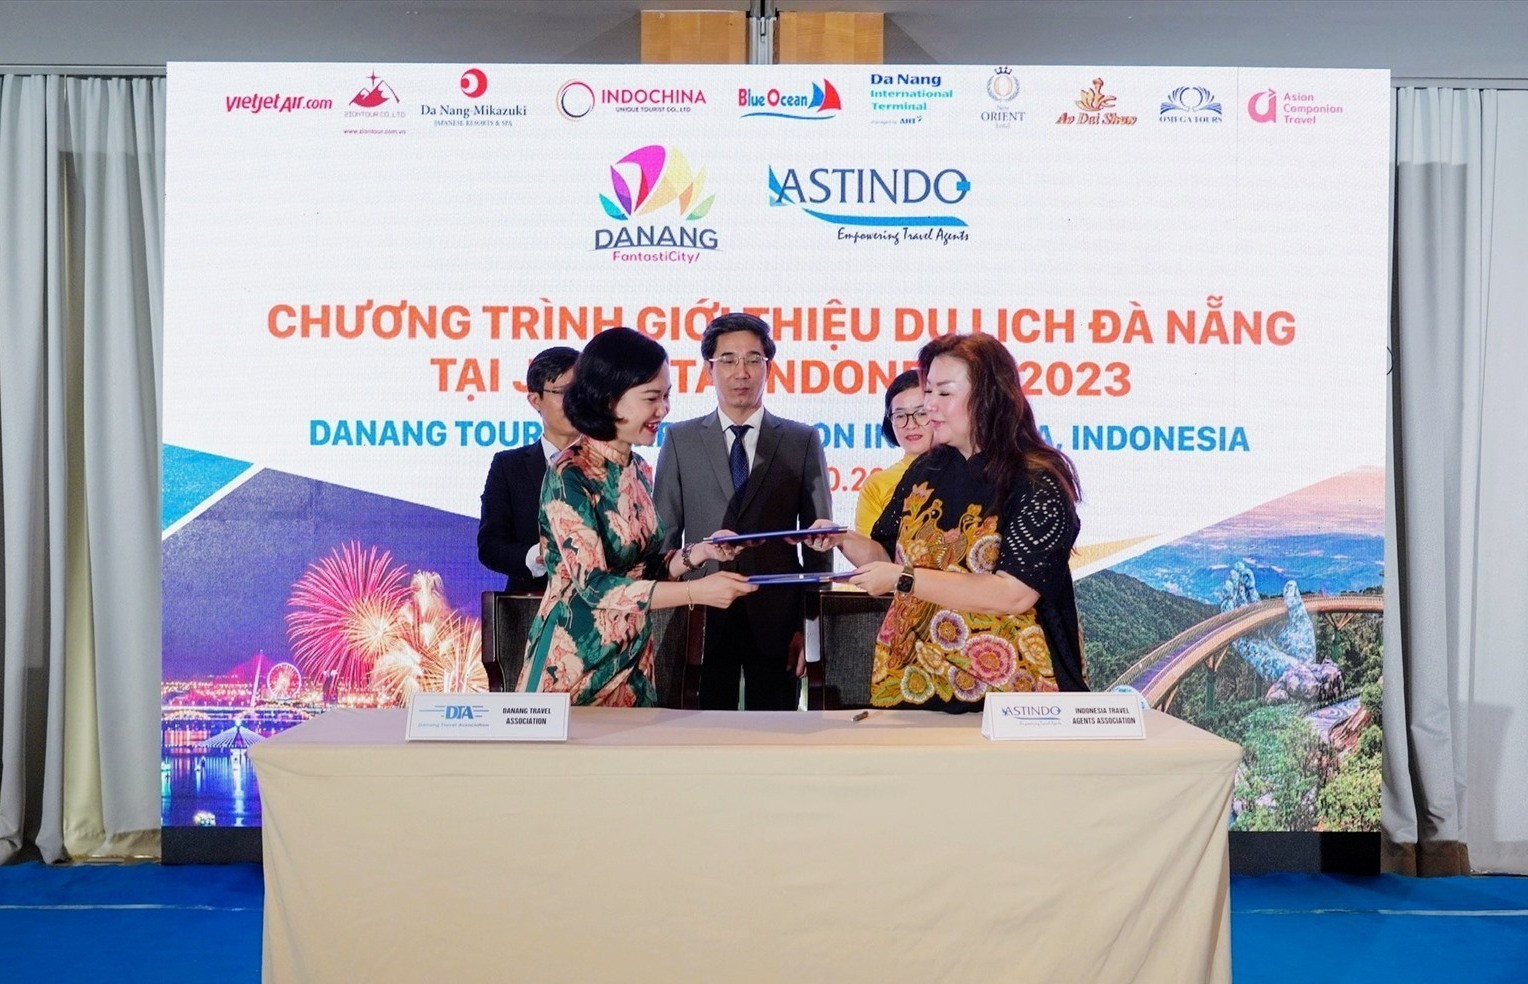 A cooperation agreement  on promoting exchange of tourist sources  was signed between the Da Nang Travel